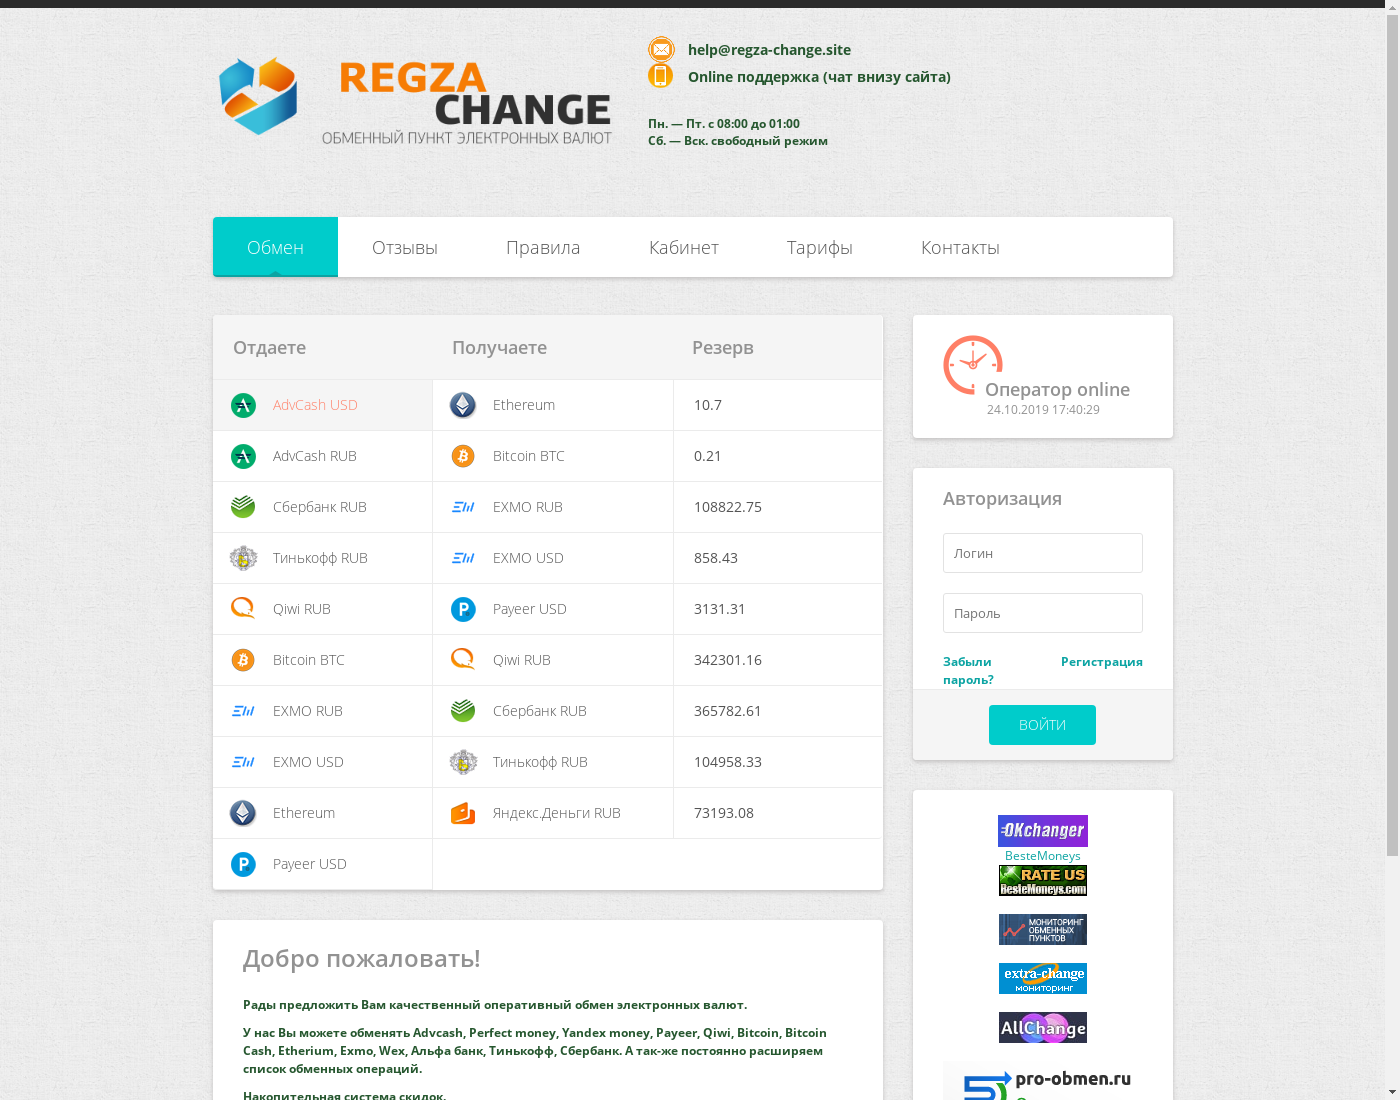 RegzaChange user interface: the home page in English